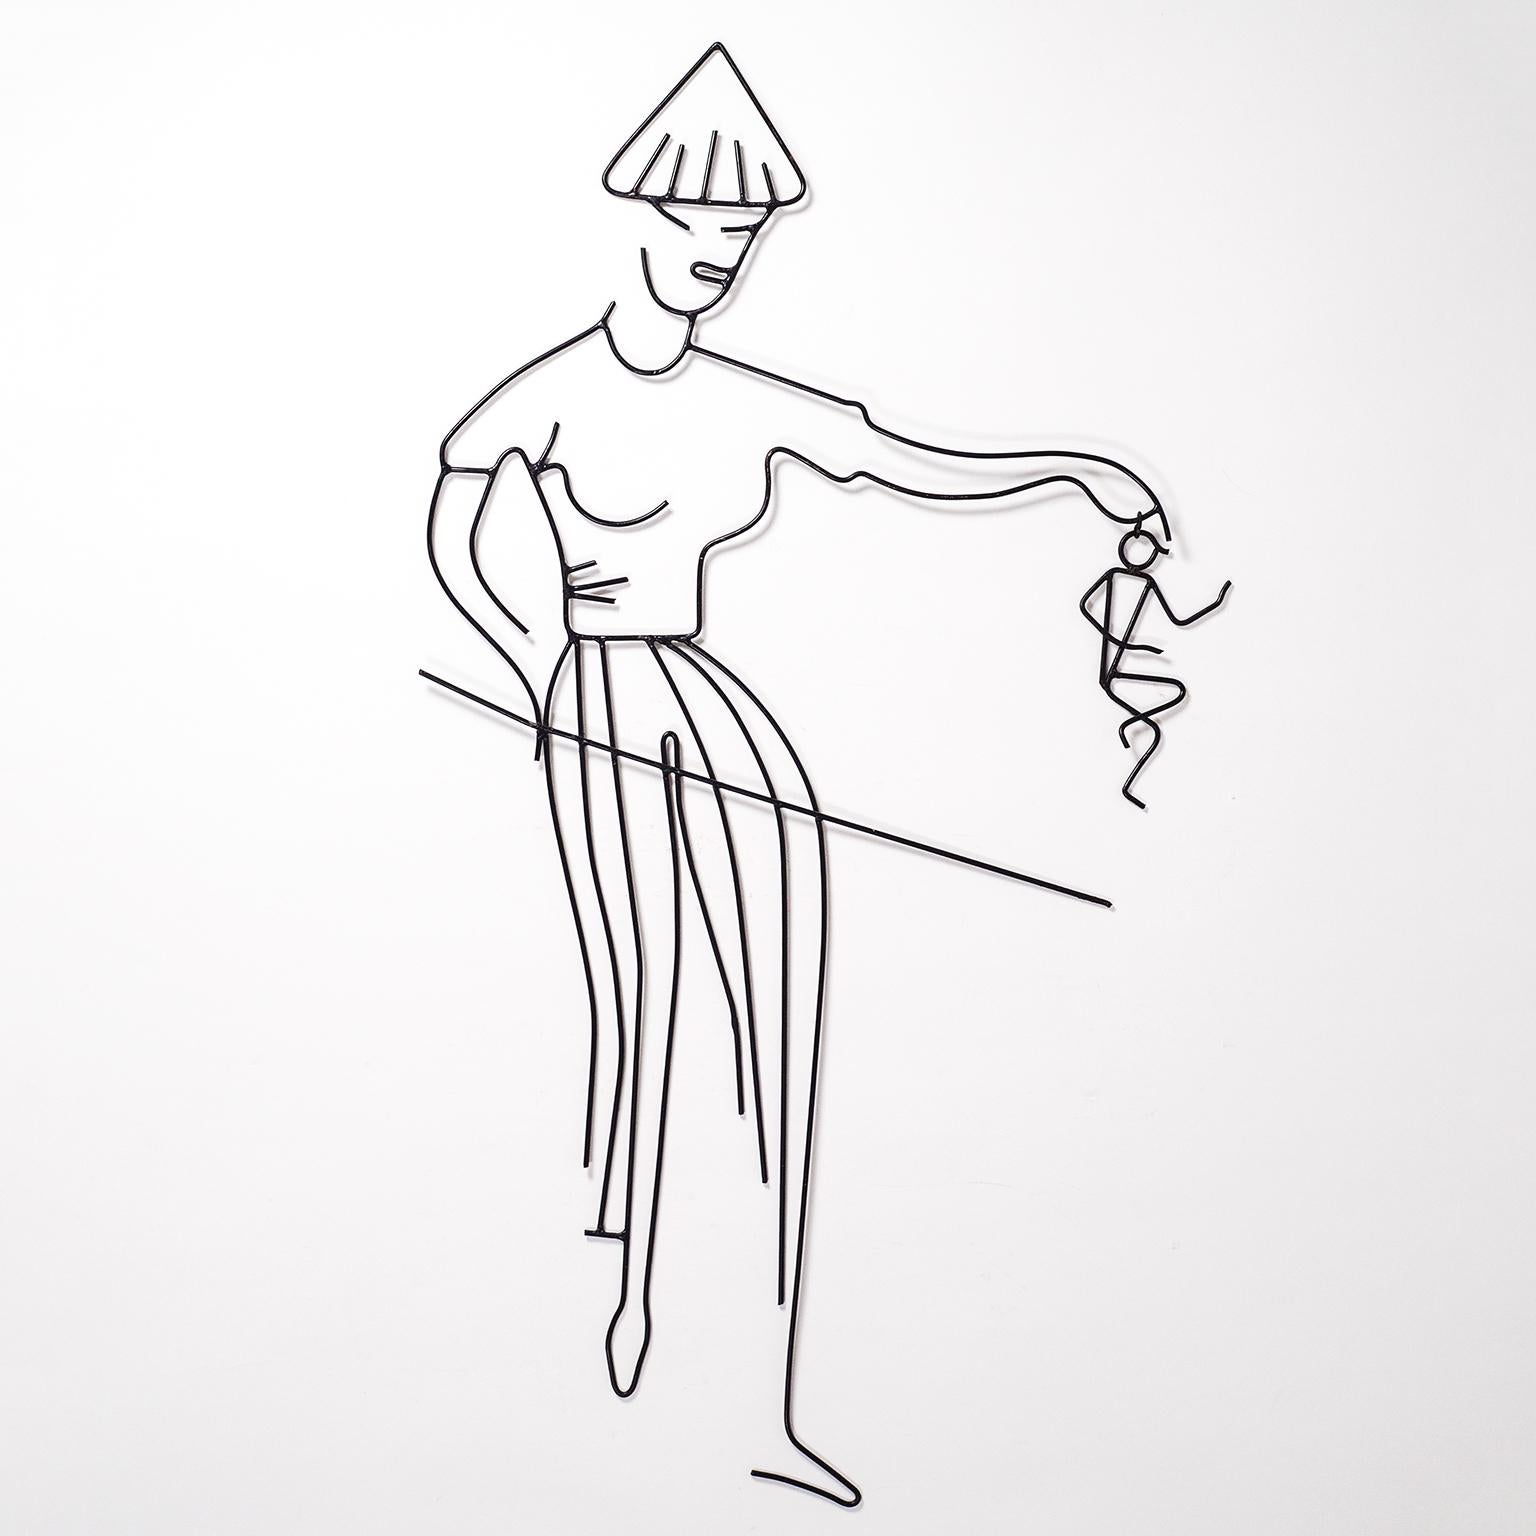 Charming midcentury wall sculpture depicting an apparently upset or angry woman carrying a tiny man about to be punished by the stick she is holding. Made of black lacquered wire this piece has a lovely graphical fluidity to it, as if drawn with a